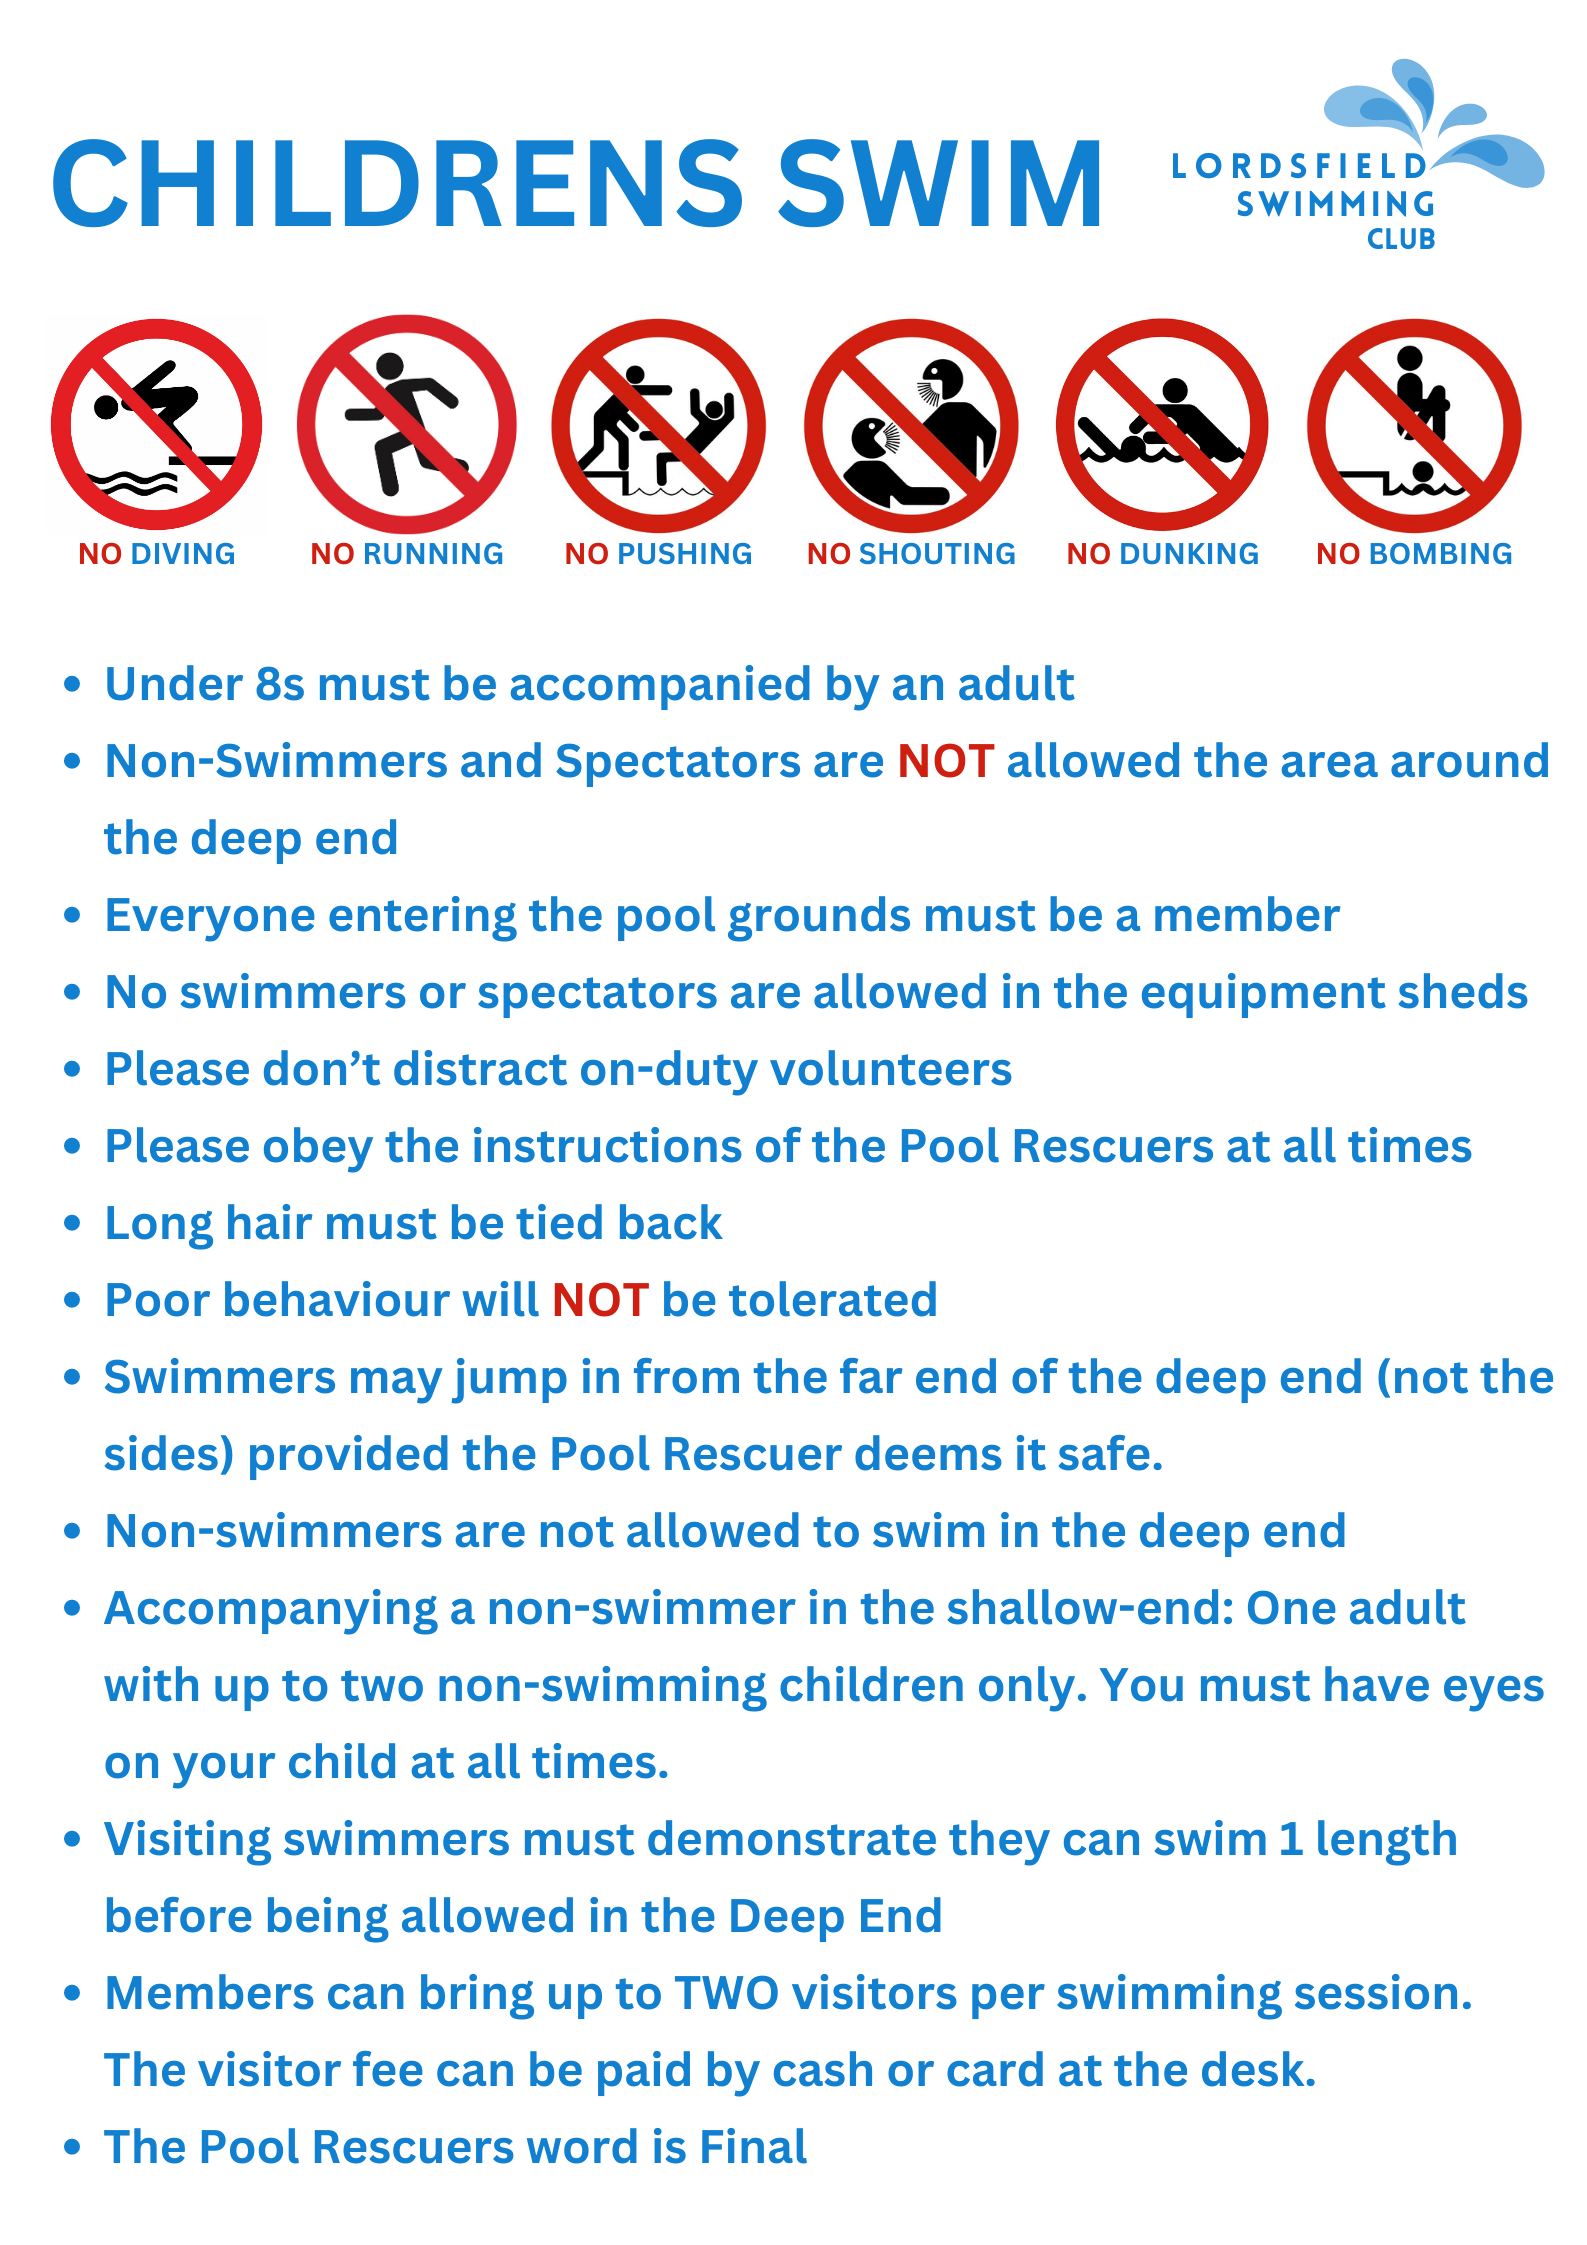 Lordsfield Swimming Club Children's Session Rules